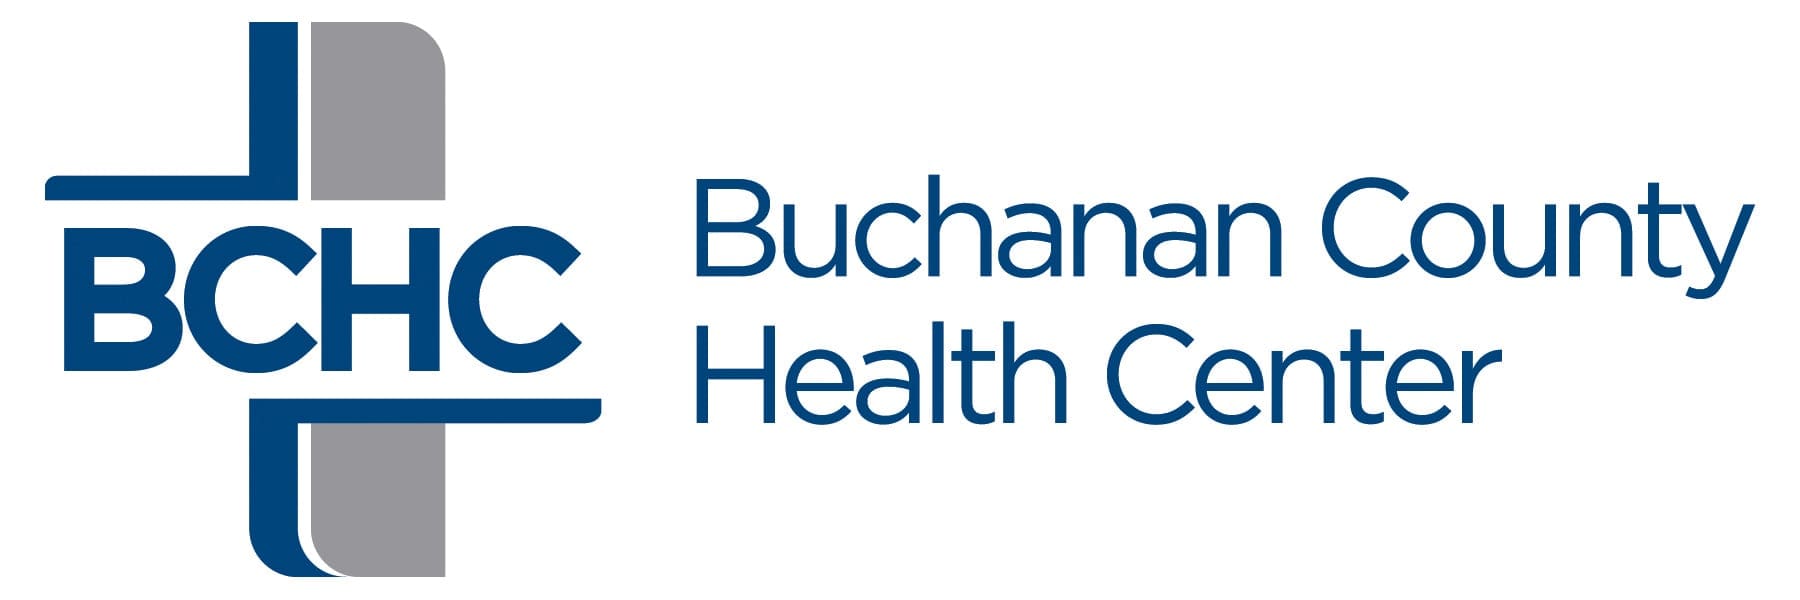 BCHC Request for Qualifications